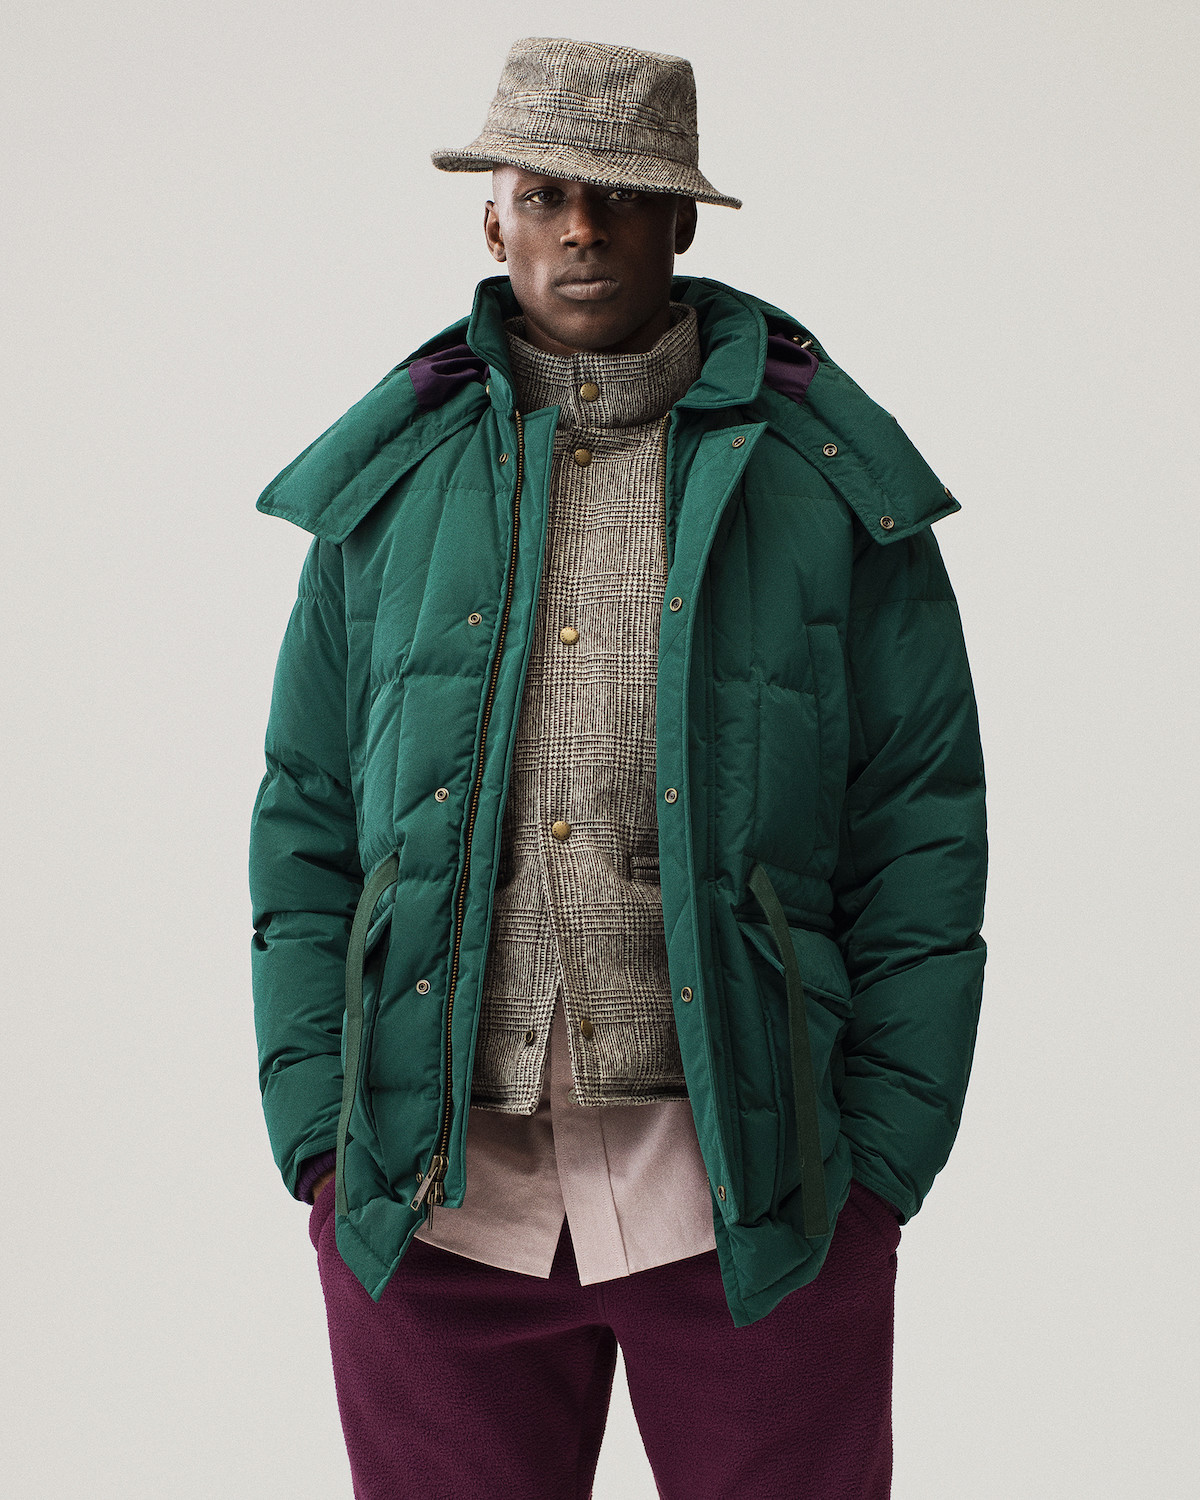 Aimé Leon Dore and Woolrich Debut Latest Collaboration - V Magazine